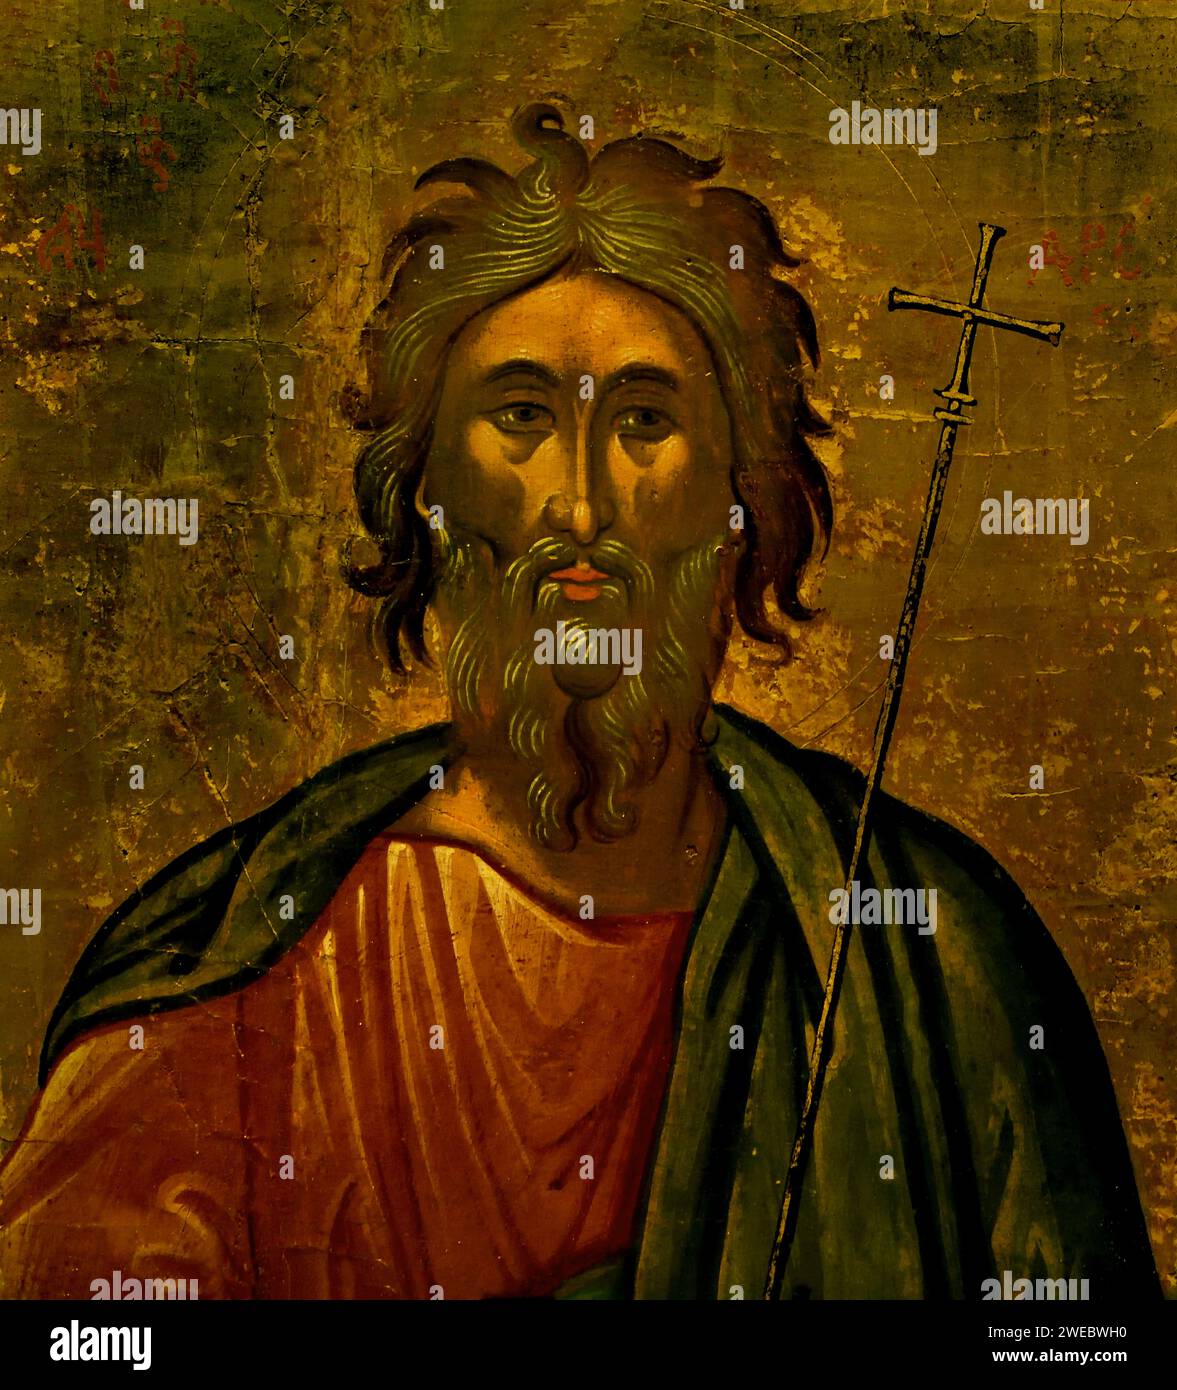 St. Andrew Icon Benaki Museum Athens Greece. ( Andrew the Apostle, also called Saint Andrew, was an apostle of Jesus. According to the New Testament, he was a fisherman and one of the Twelve Apostles chosen by Jesus. ) Stock Photo